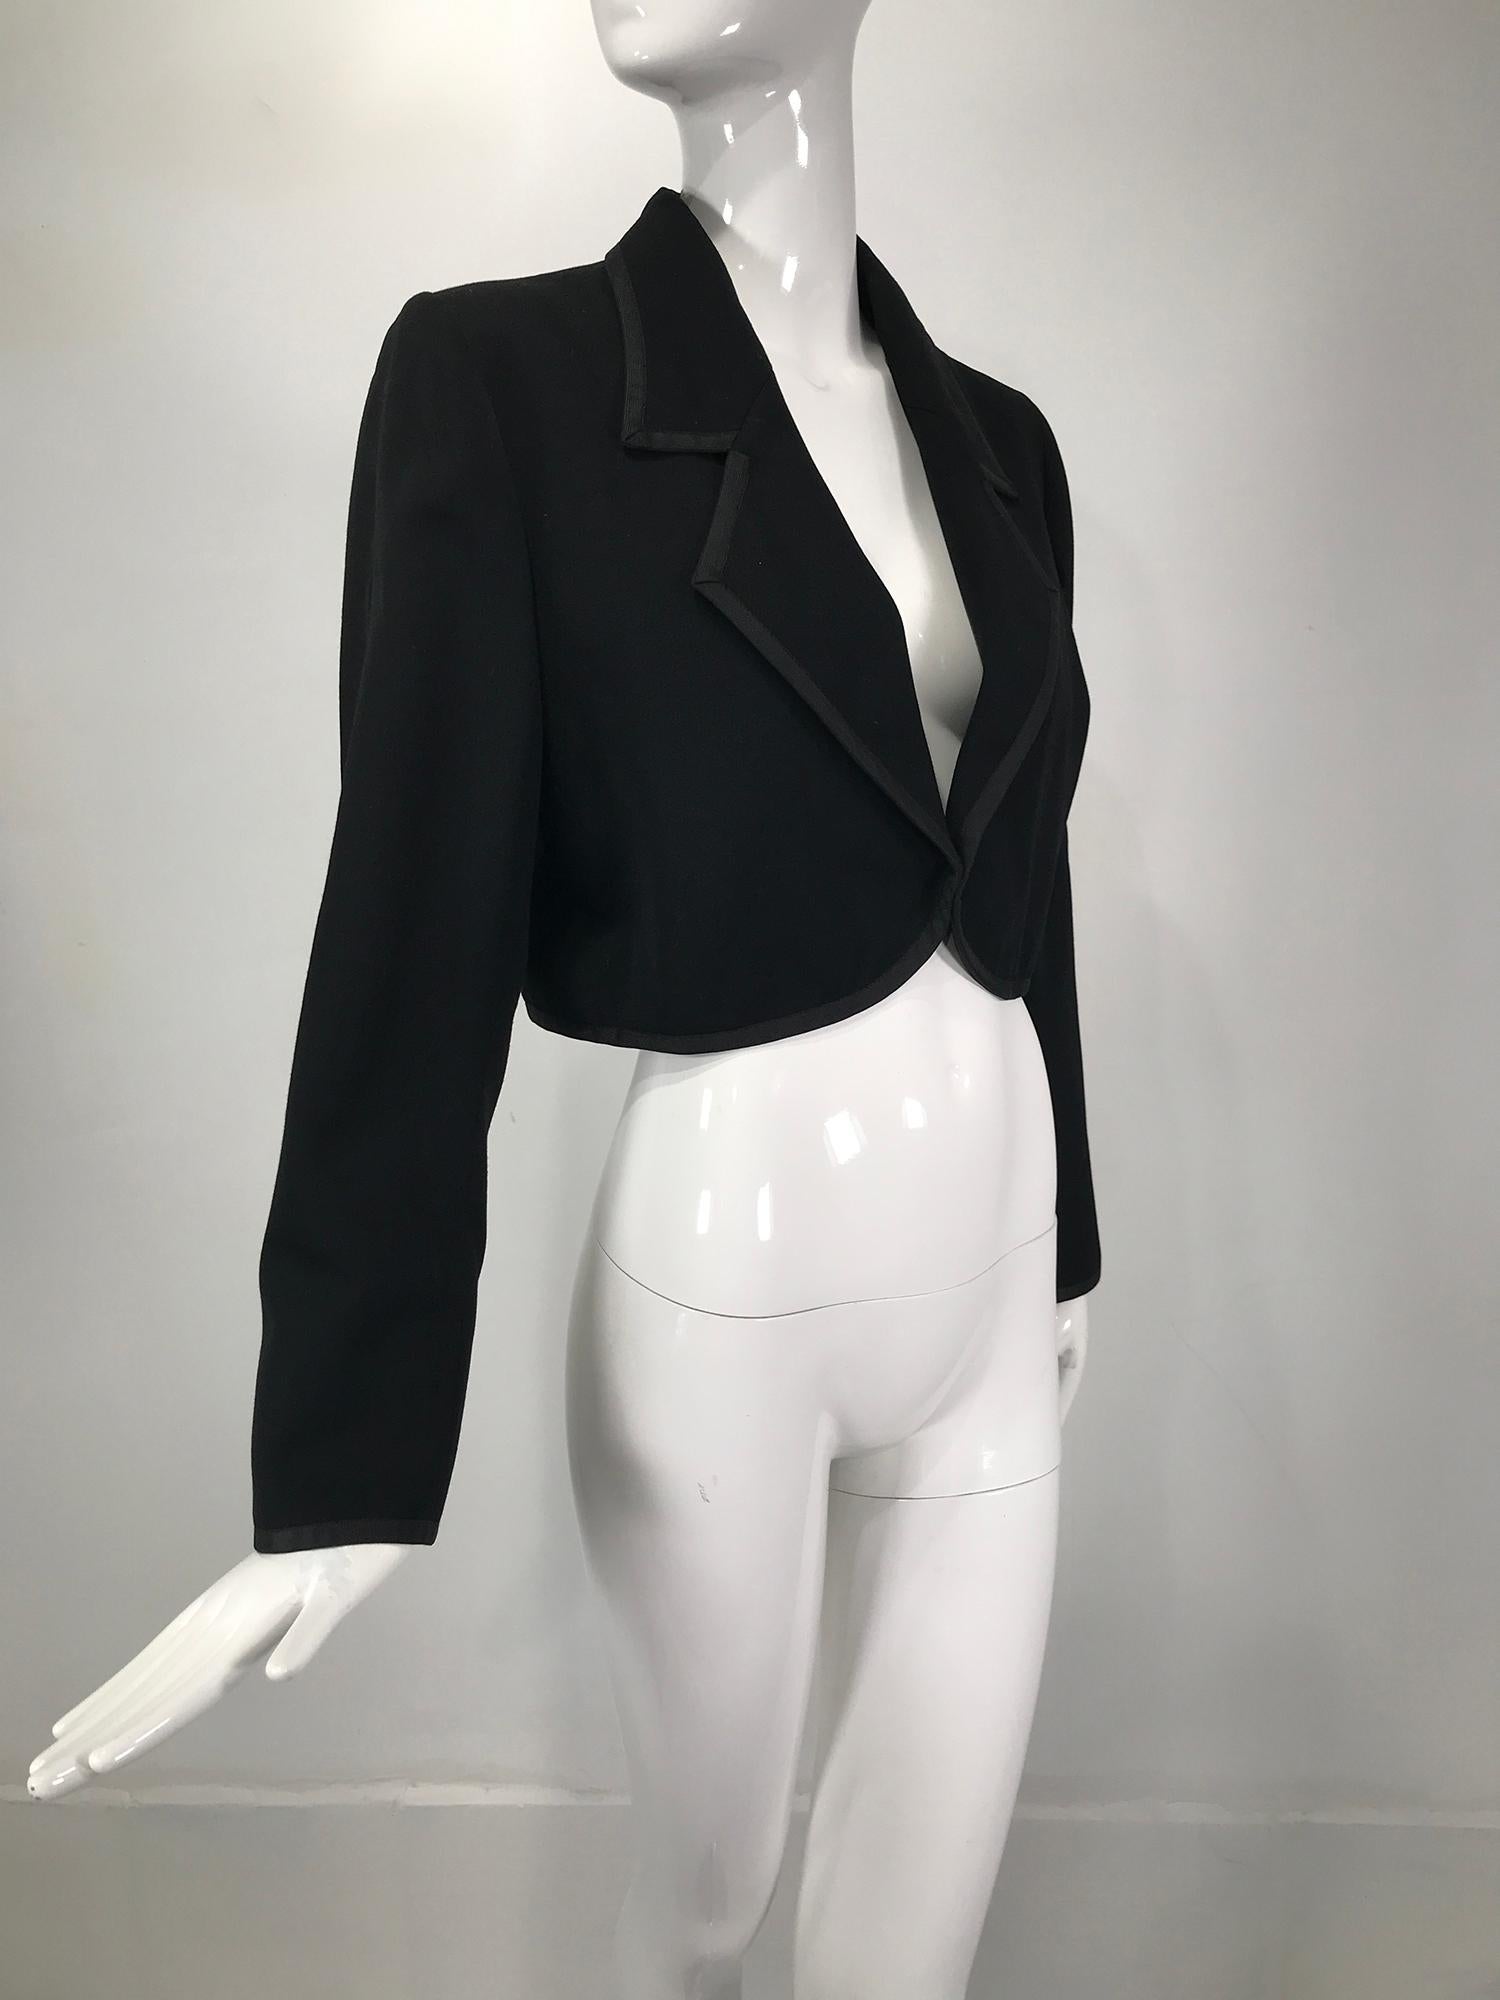 Yves Saint Laurent Rive Gauche black gabardine cropped jacket with braid trim from the 1970s. Open front jacket with notched lapels, long sleeves with button cuffs, cropped above the waist, fully lined. Marked size 42. In very good pre-owned